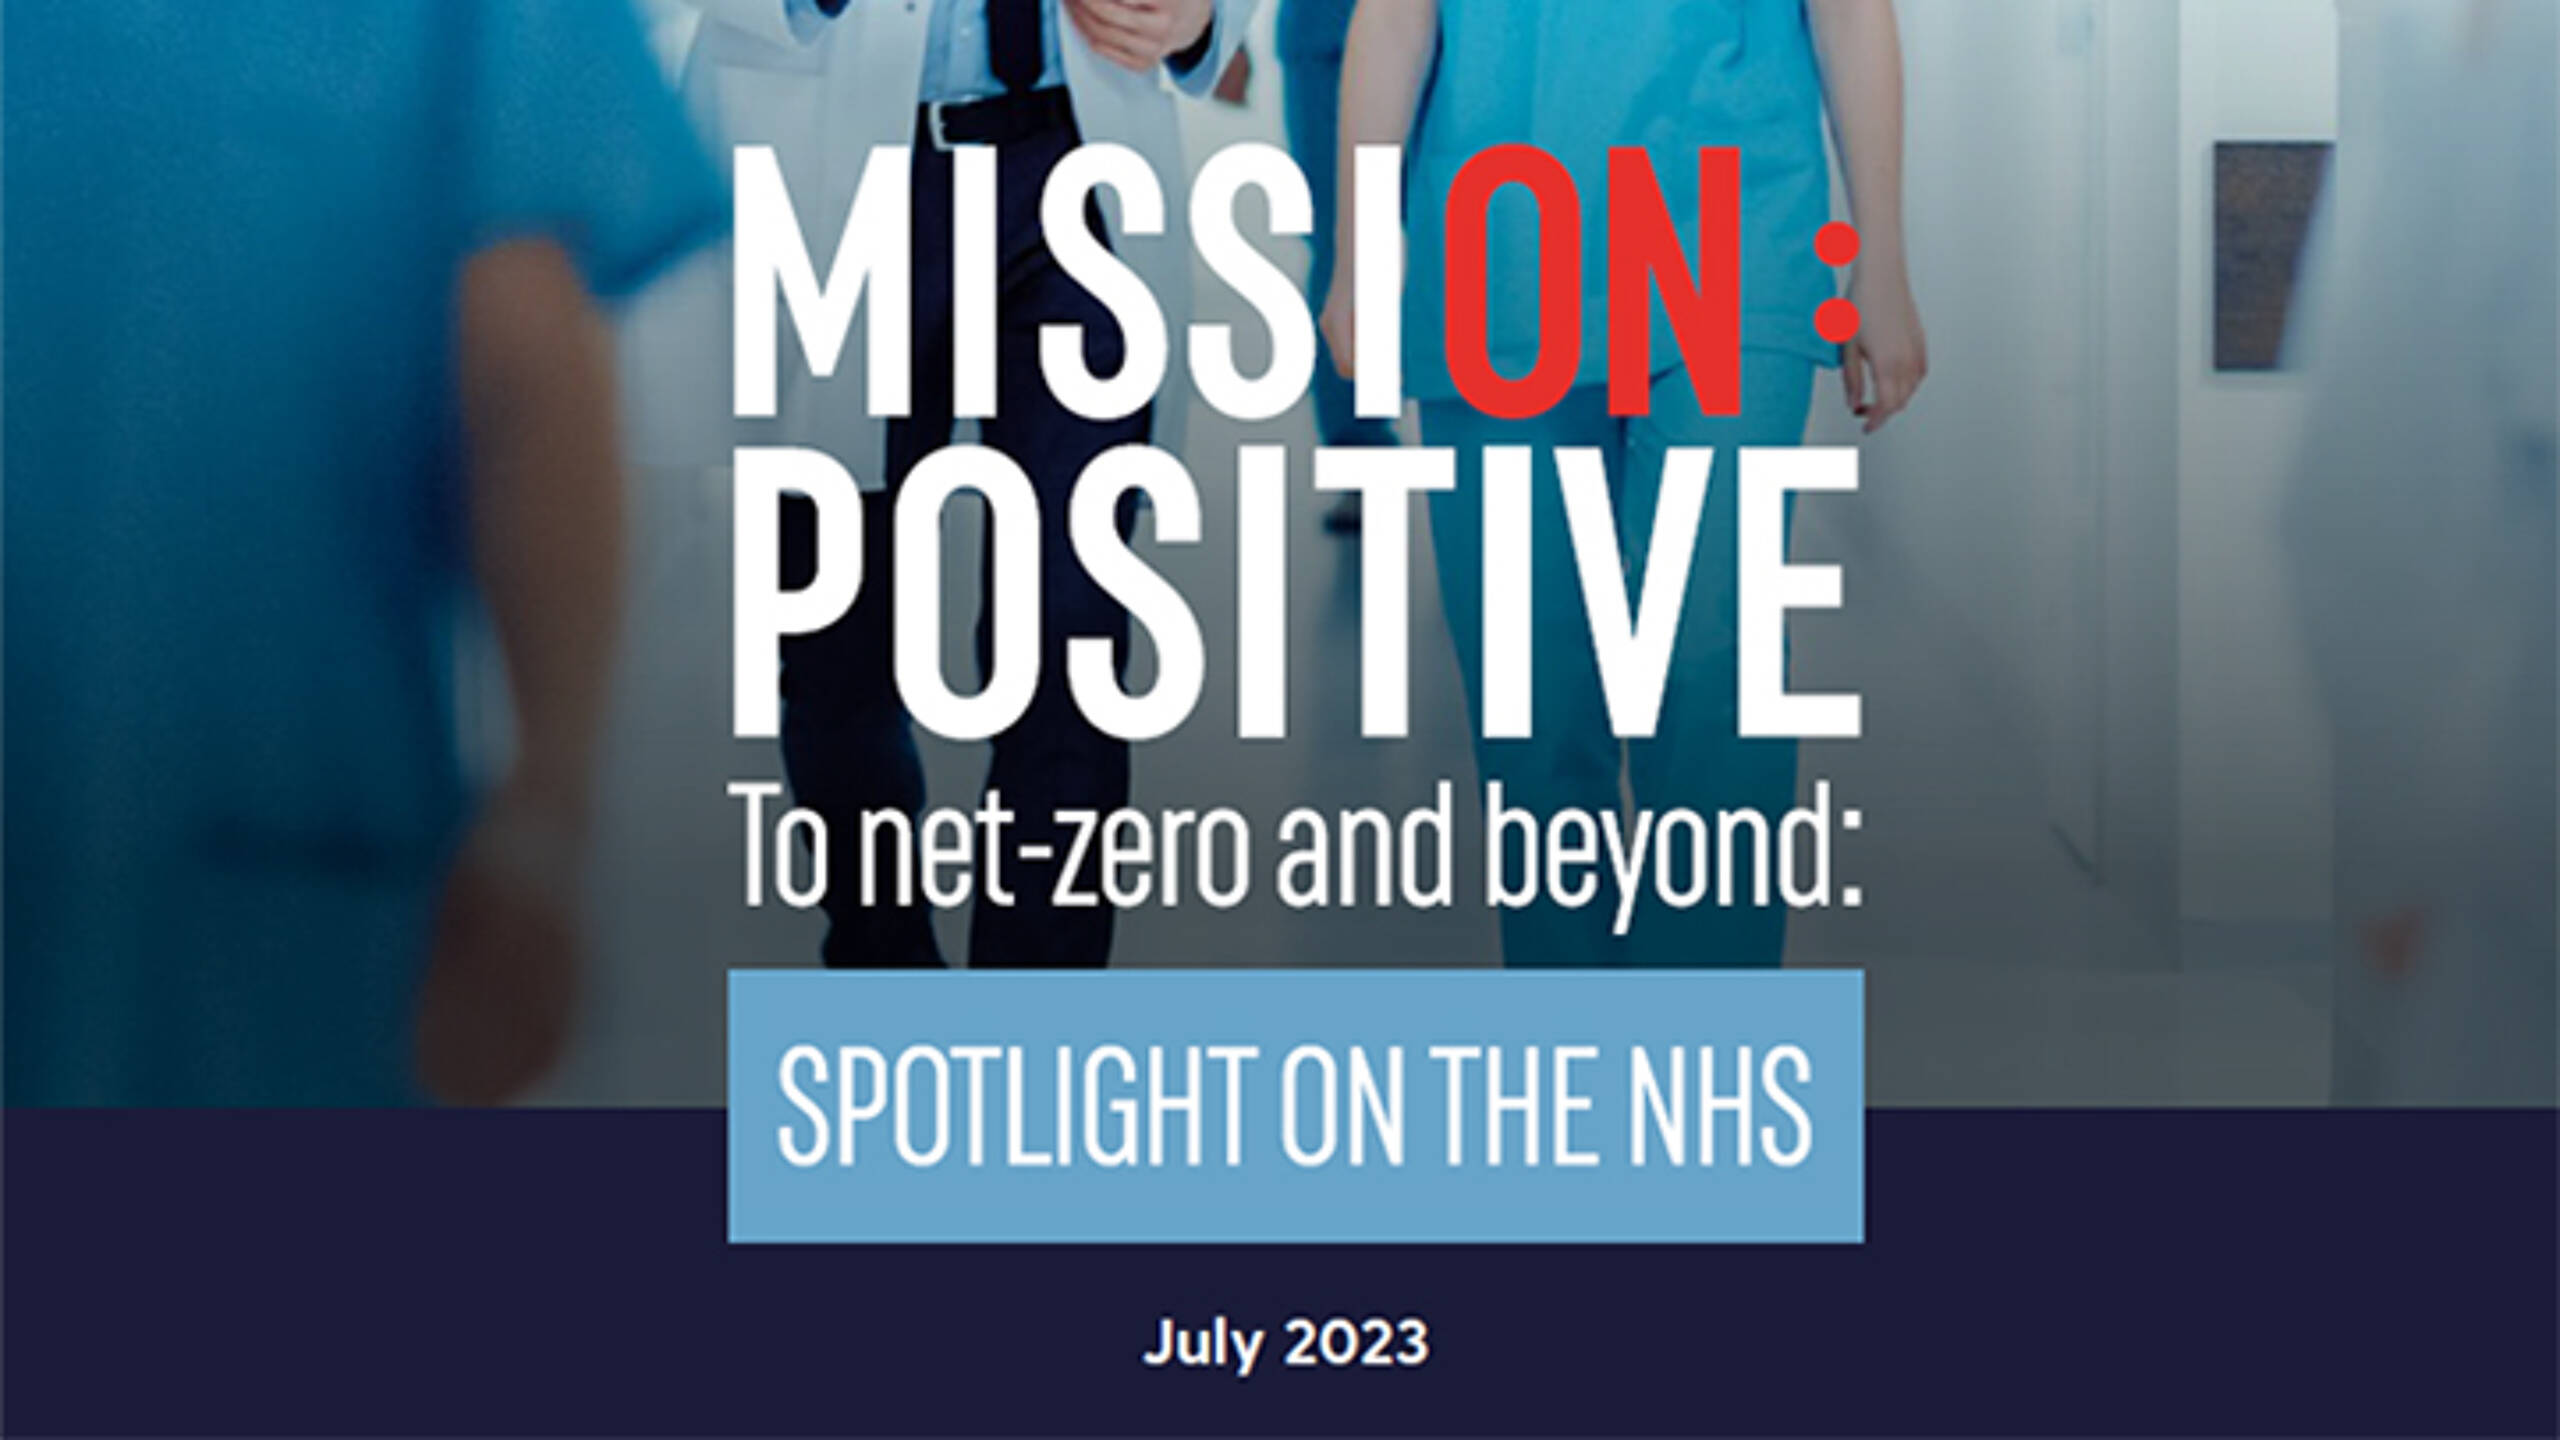 Mission Positive: To net-zero and beyond in the NHS